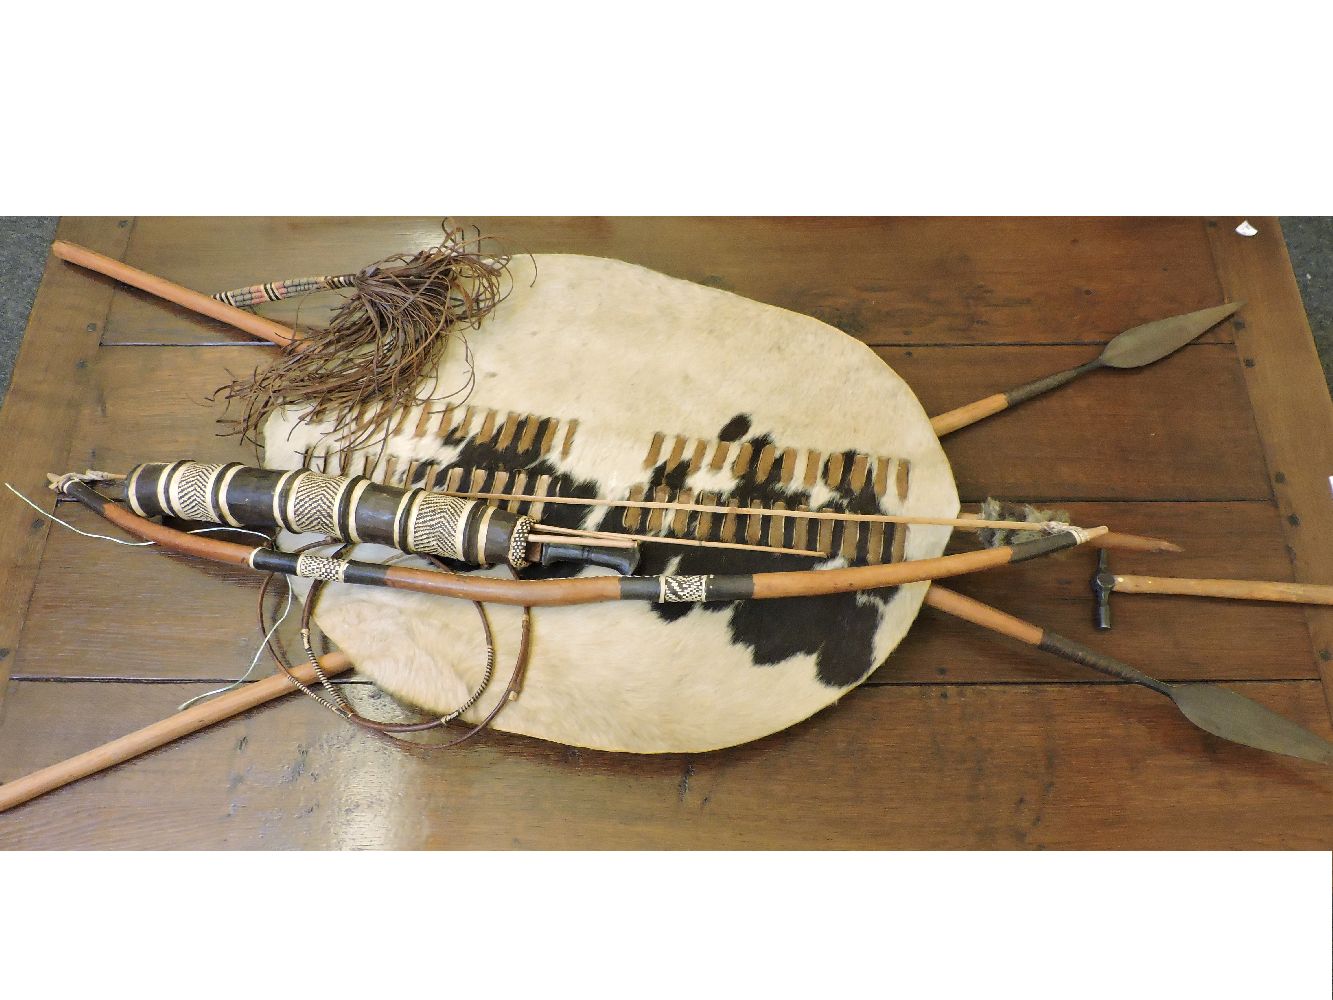 Two modern Zulu spears, a hide shield, arrows in a quiver, bow and fly whisk